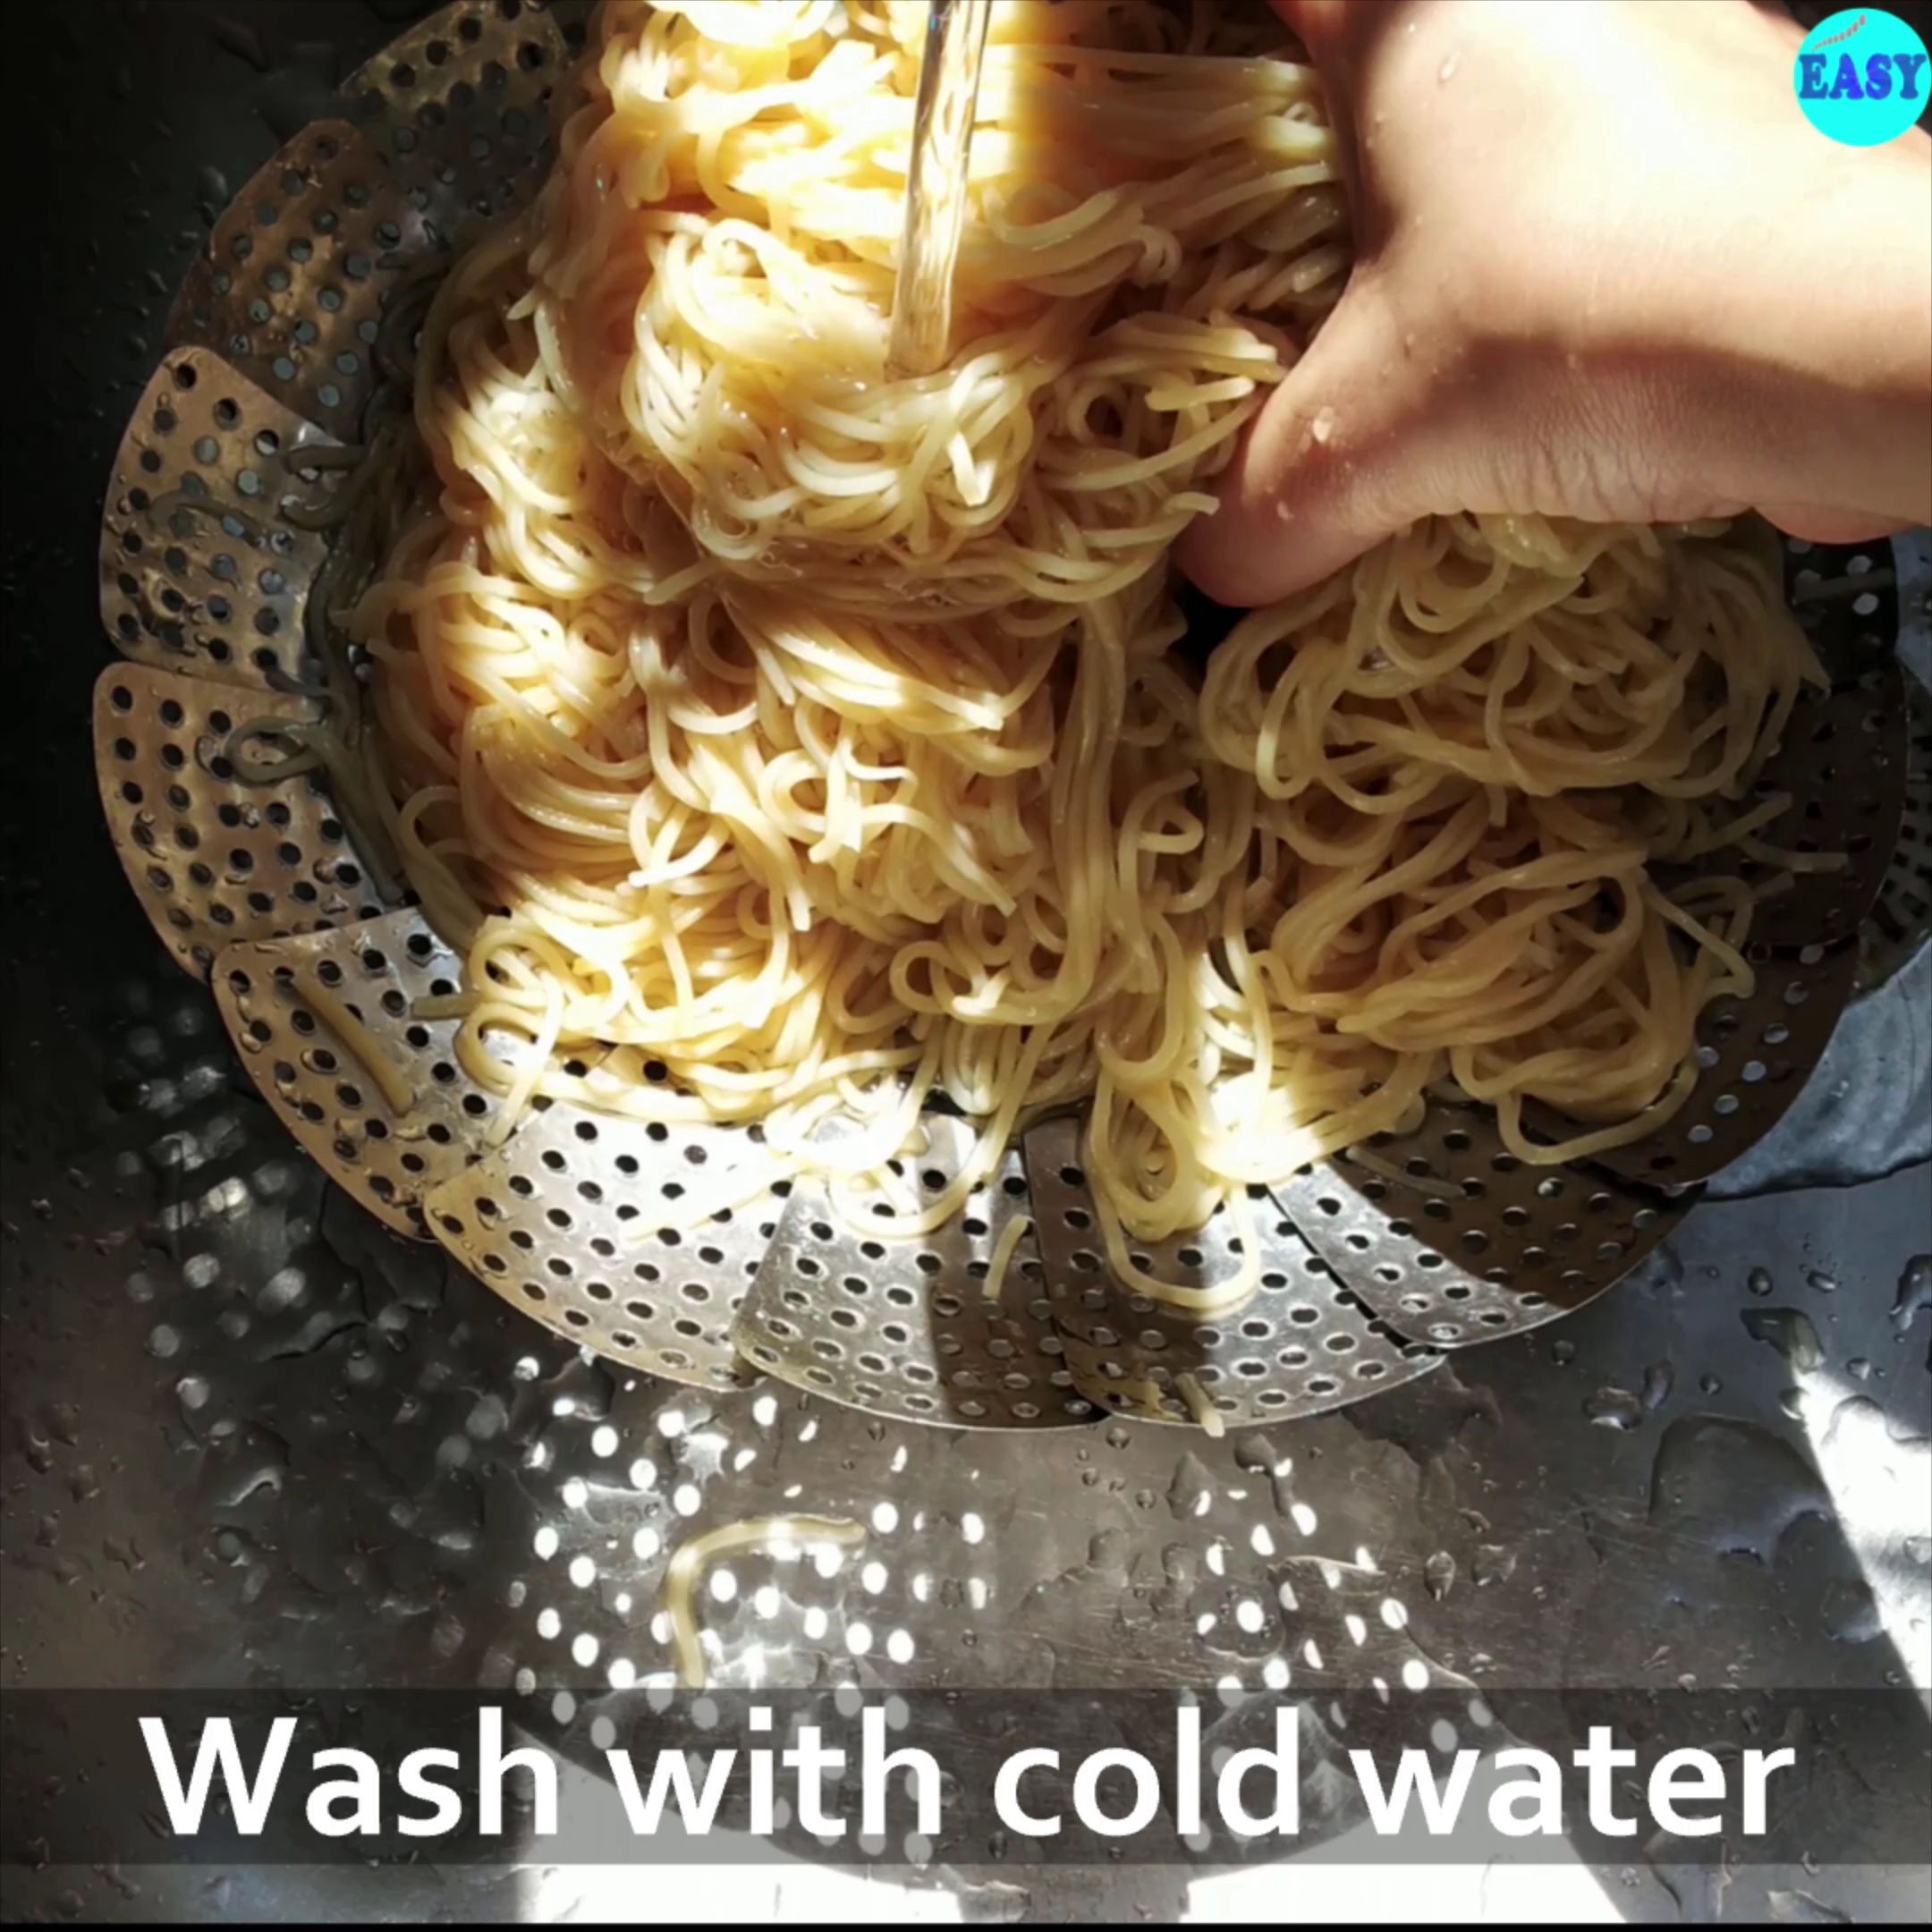 Step 3 - Wash with cold water.